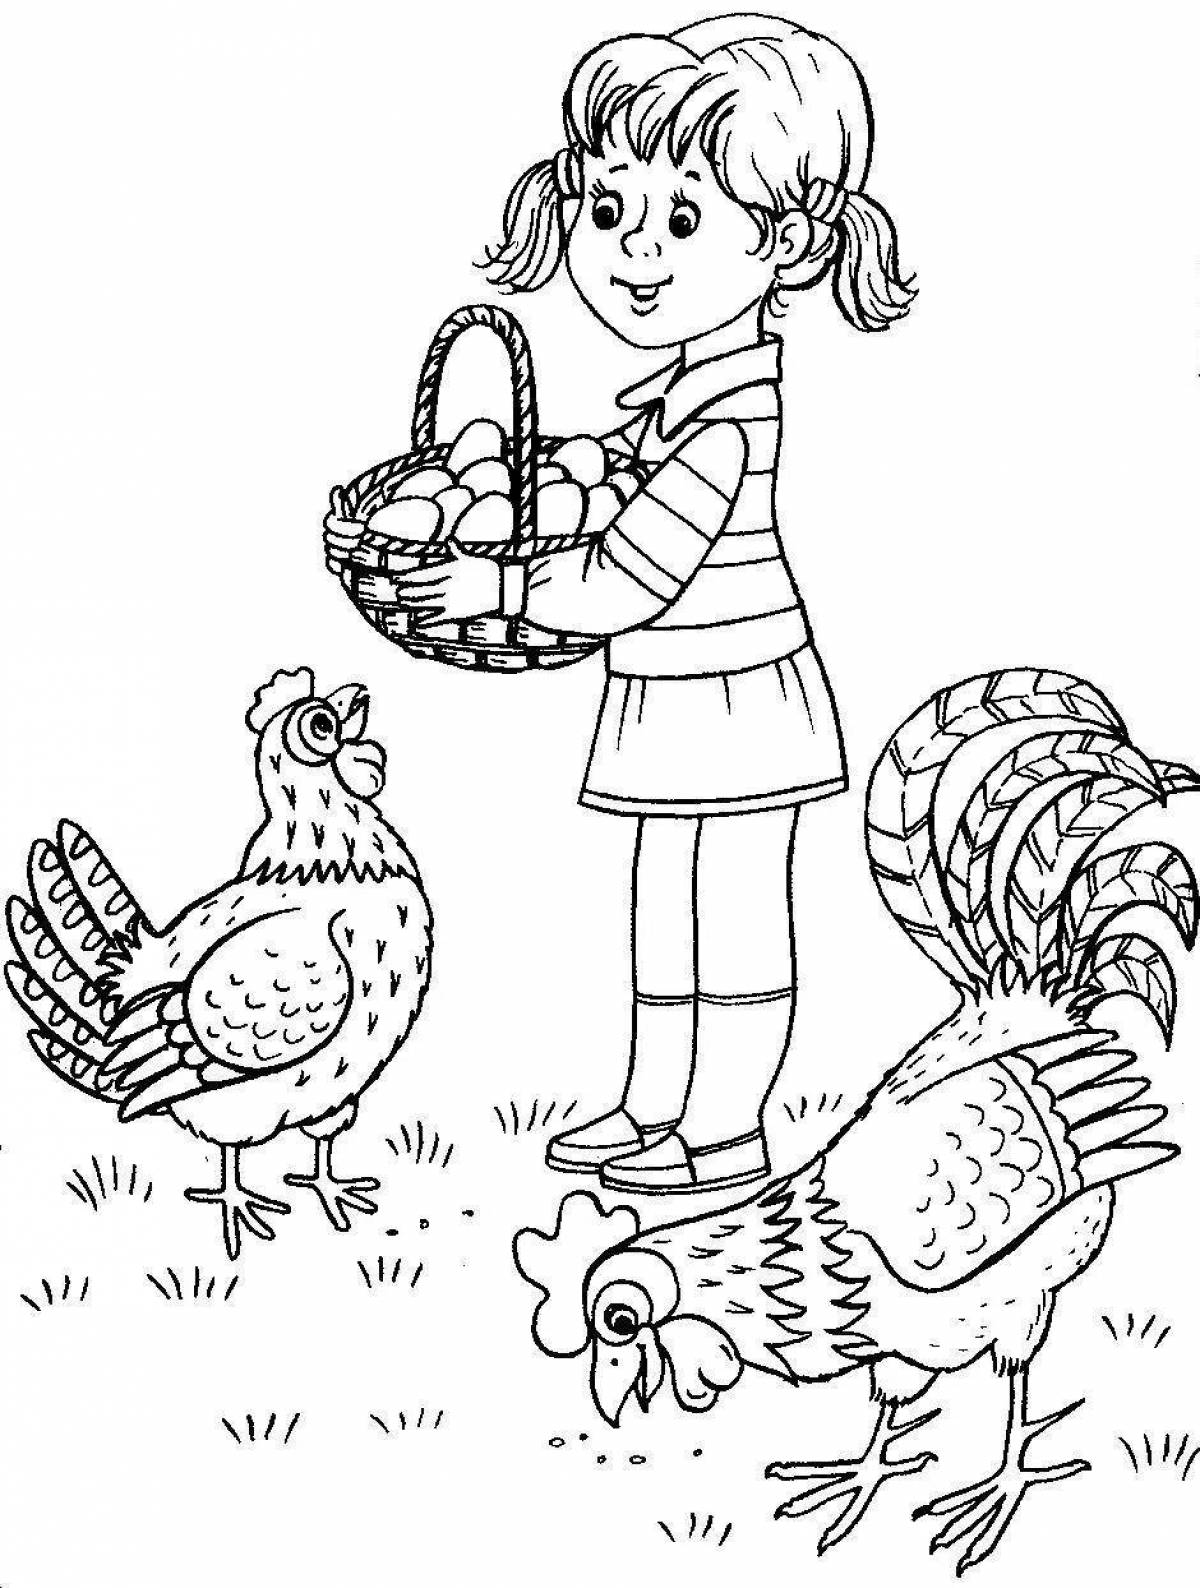 Charming kindness coloring page